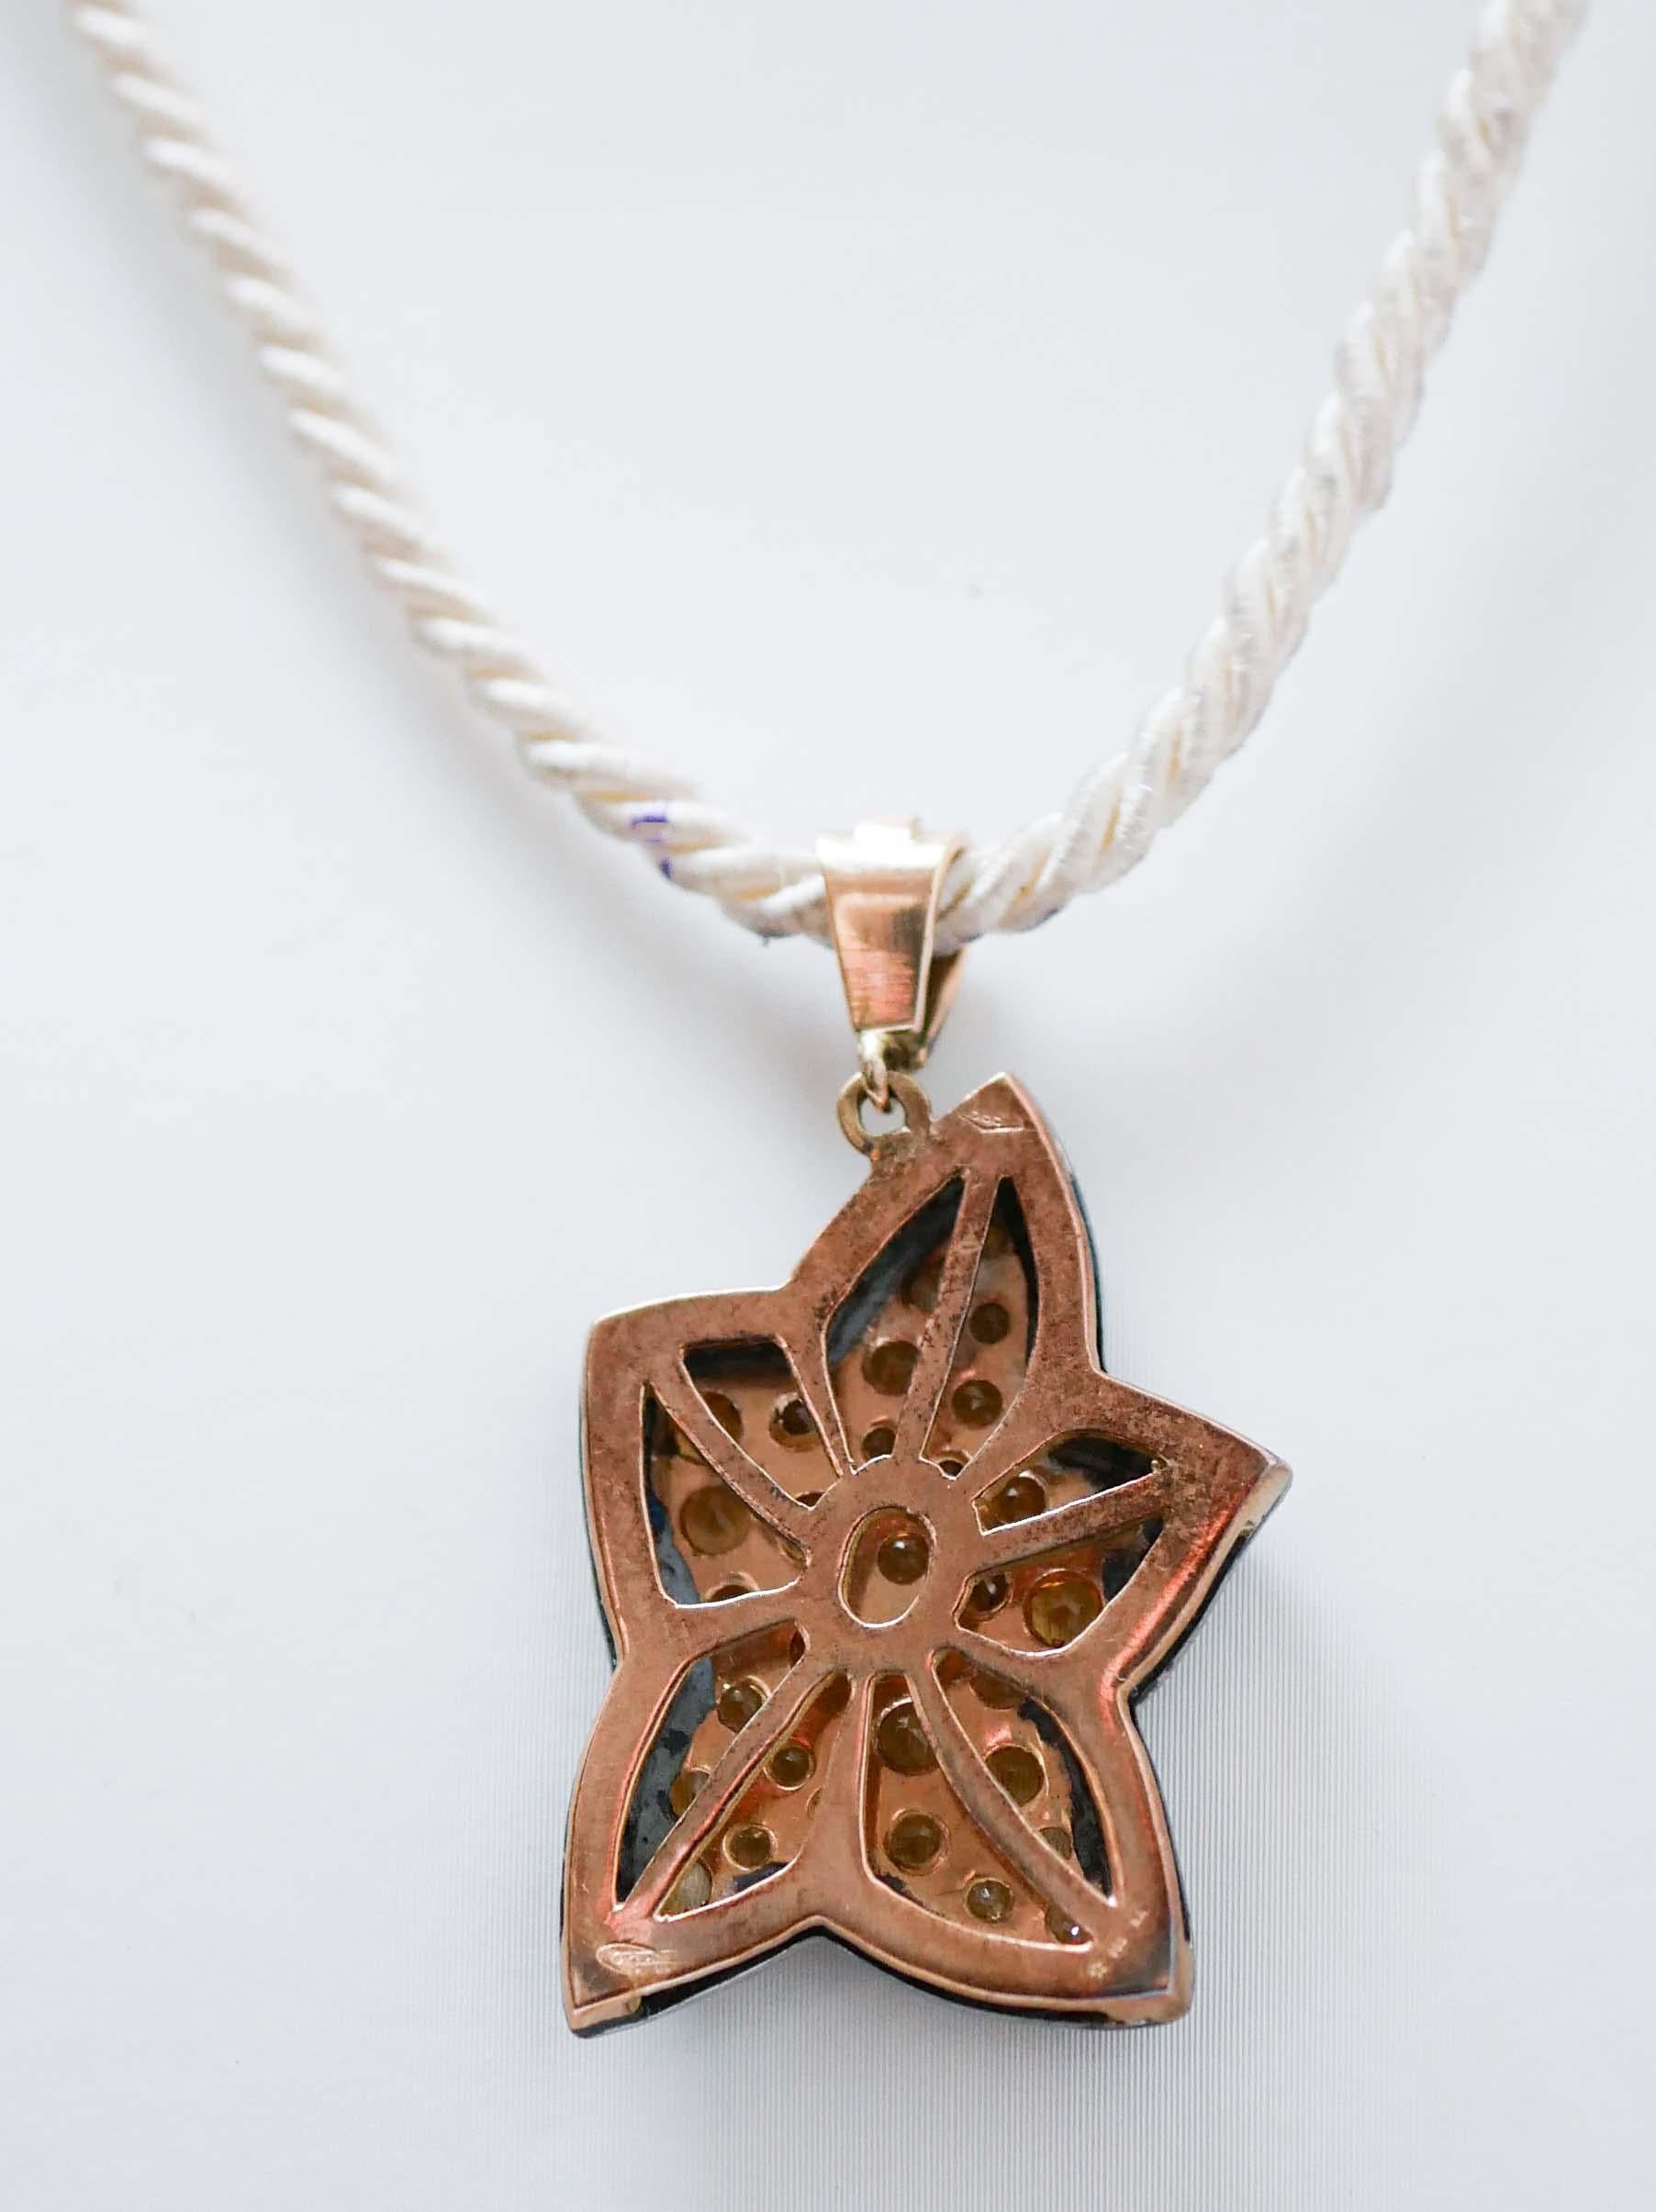 Mixed Cut Topazs, Diamonds, 14 Karat Rose Gold and Silver Star Pendant Necklace. For Sale